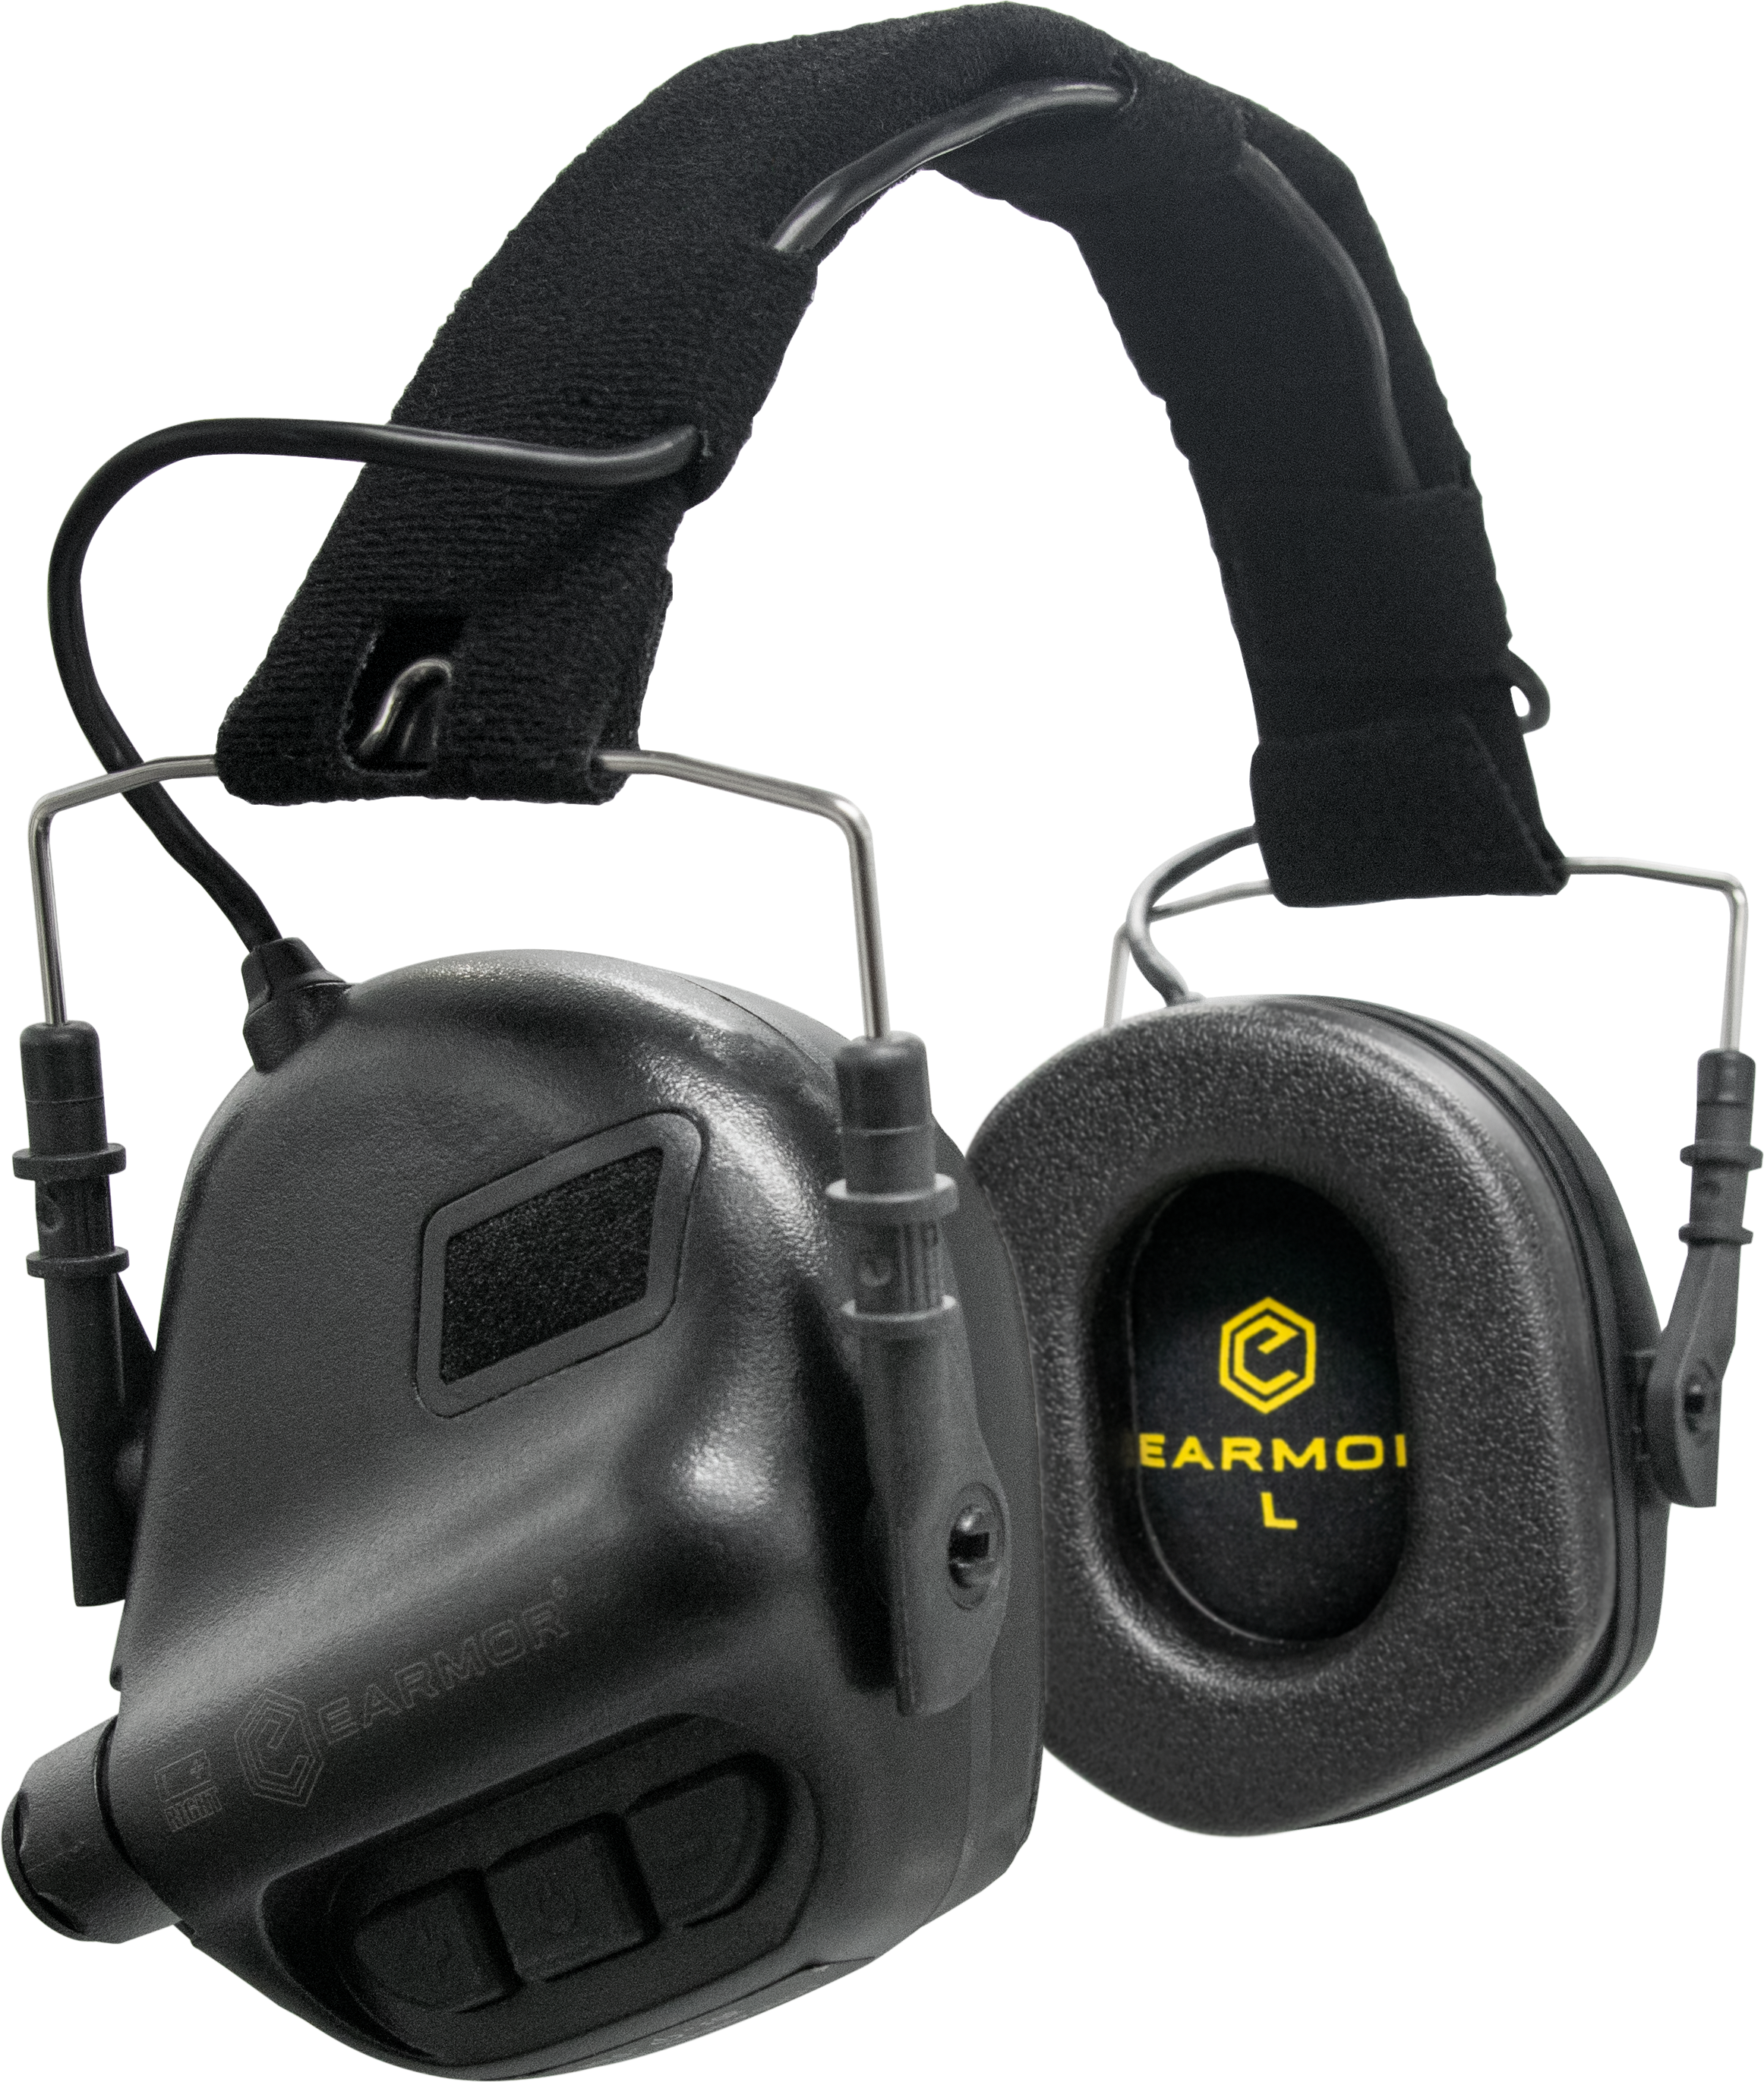 Active Hearing Protection & Enhancement Headset For Airsoft, Tactical  Training, Recreation, Hunting, etc.